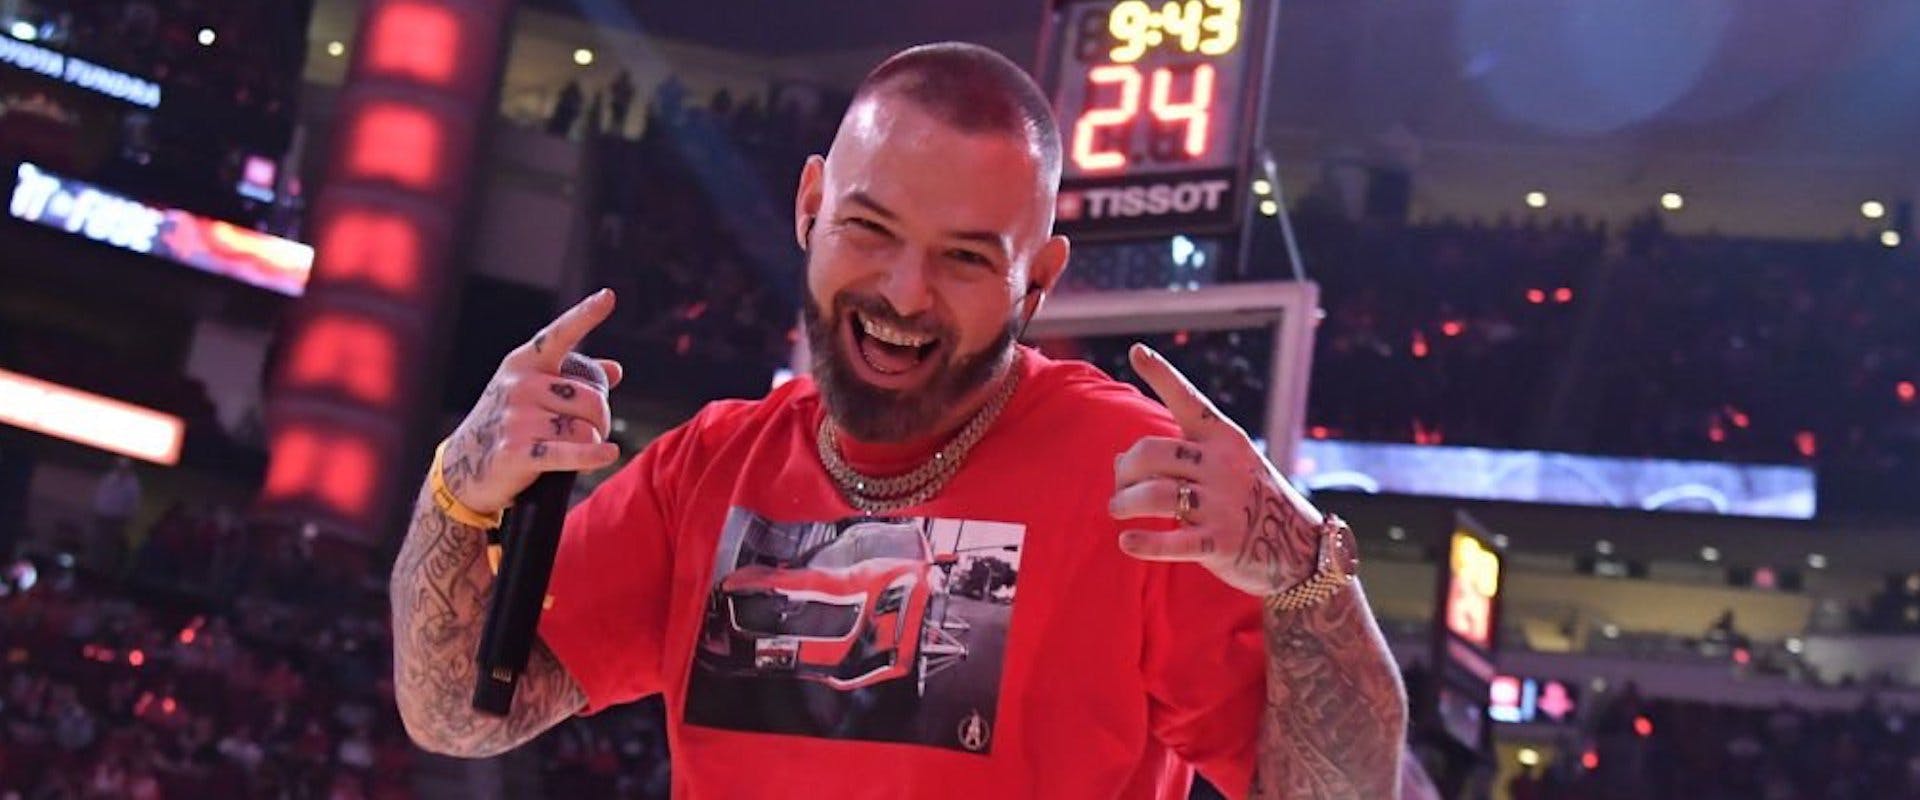 Paul Wall gets introduced prior to a game between the Houston Rockets and the Oklahoma City Thunder on October 22, 2021 at the Toyota Center in Houston, Texas.